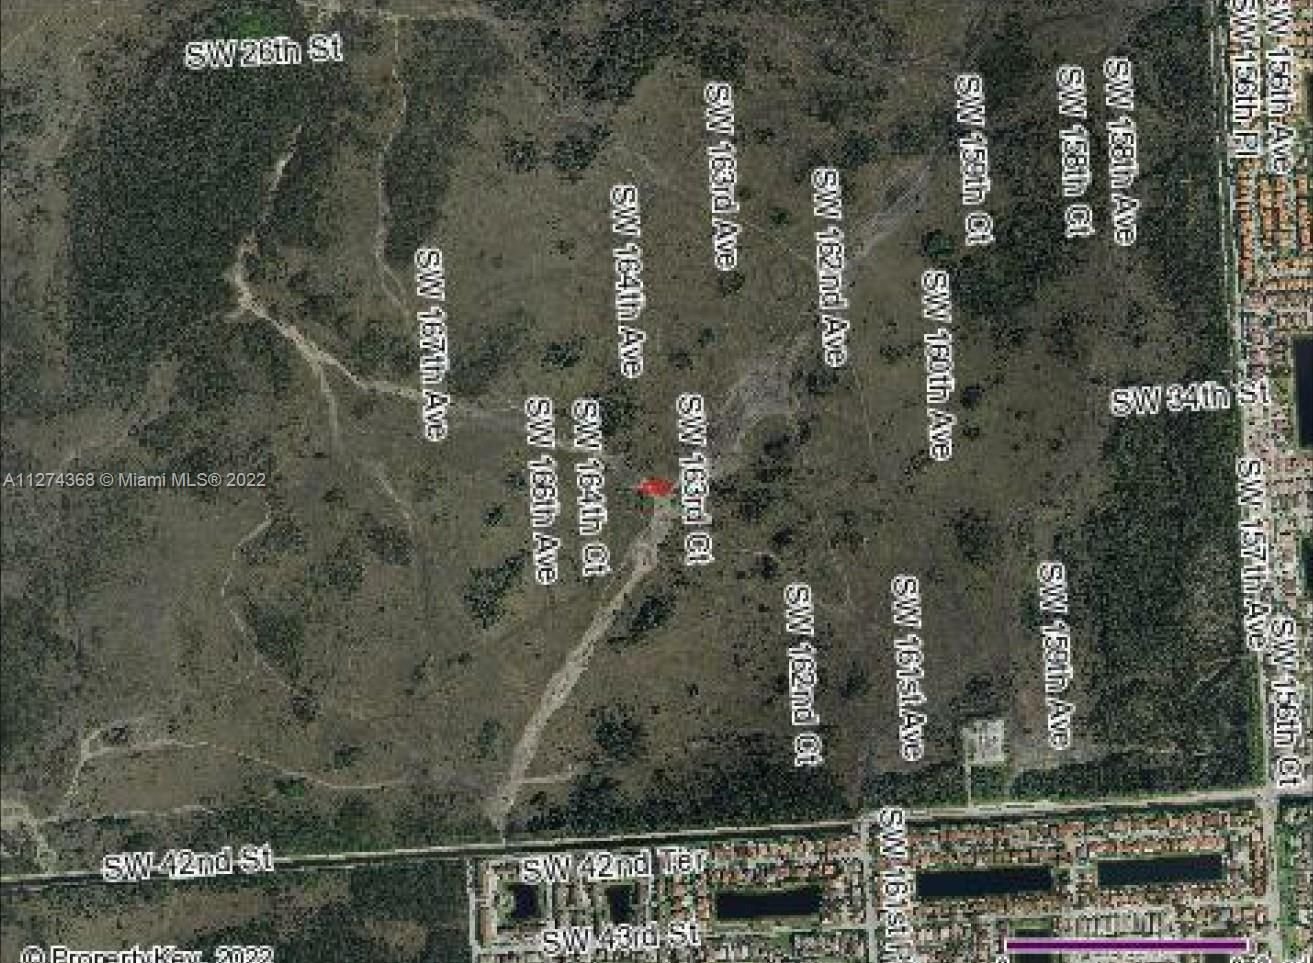 Real estate property located at SW 36 ST & SW 164 AVE, Miami-Dade County, ATHOL, Miami, FL